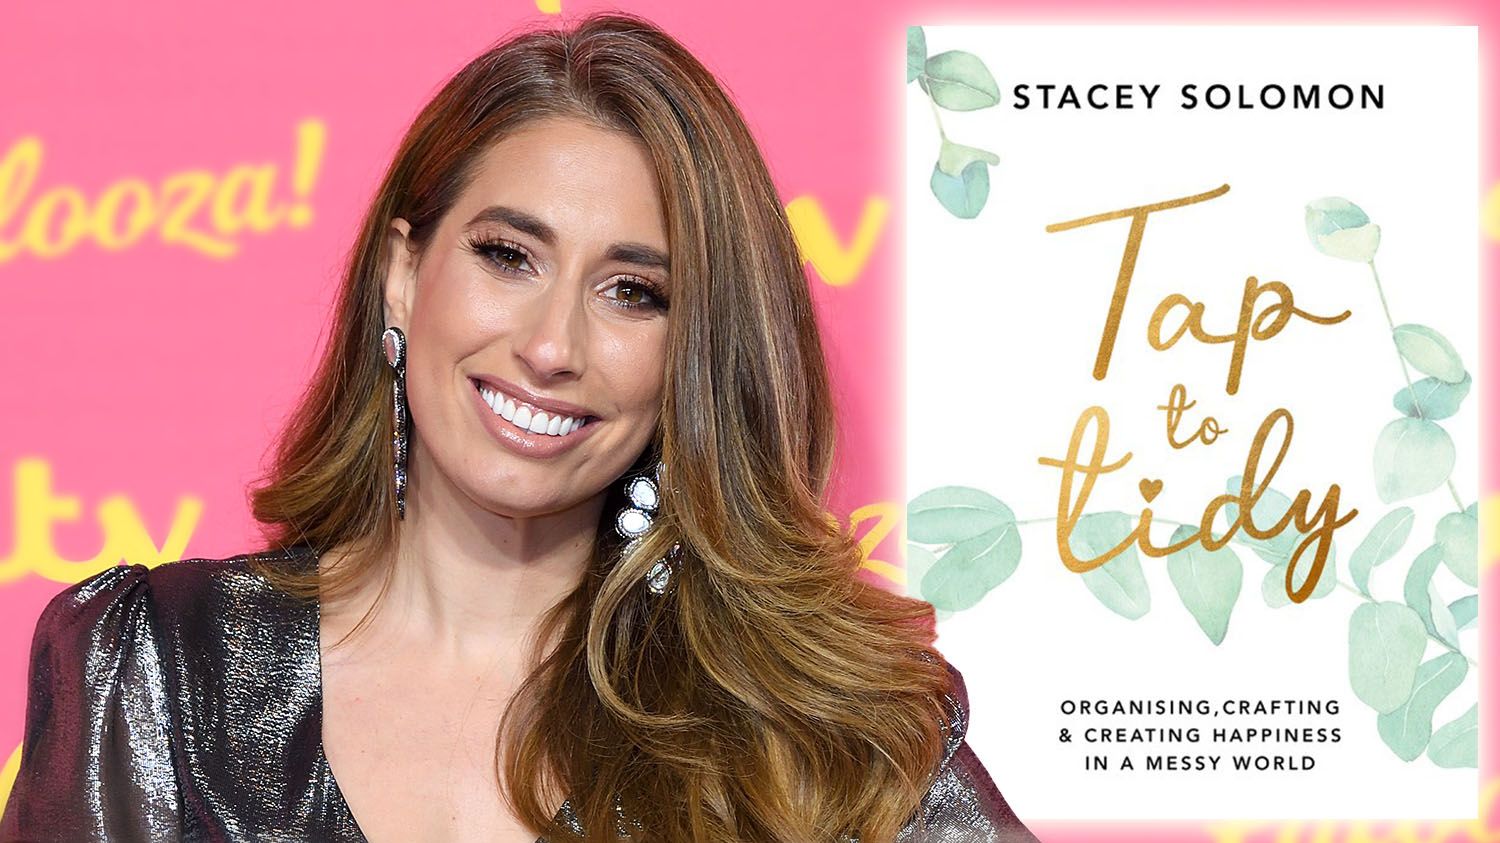 Stacey Solomon releasing her book 'Tap To Tidy'